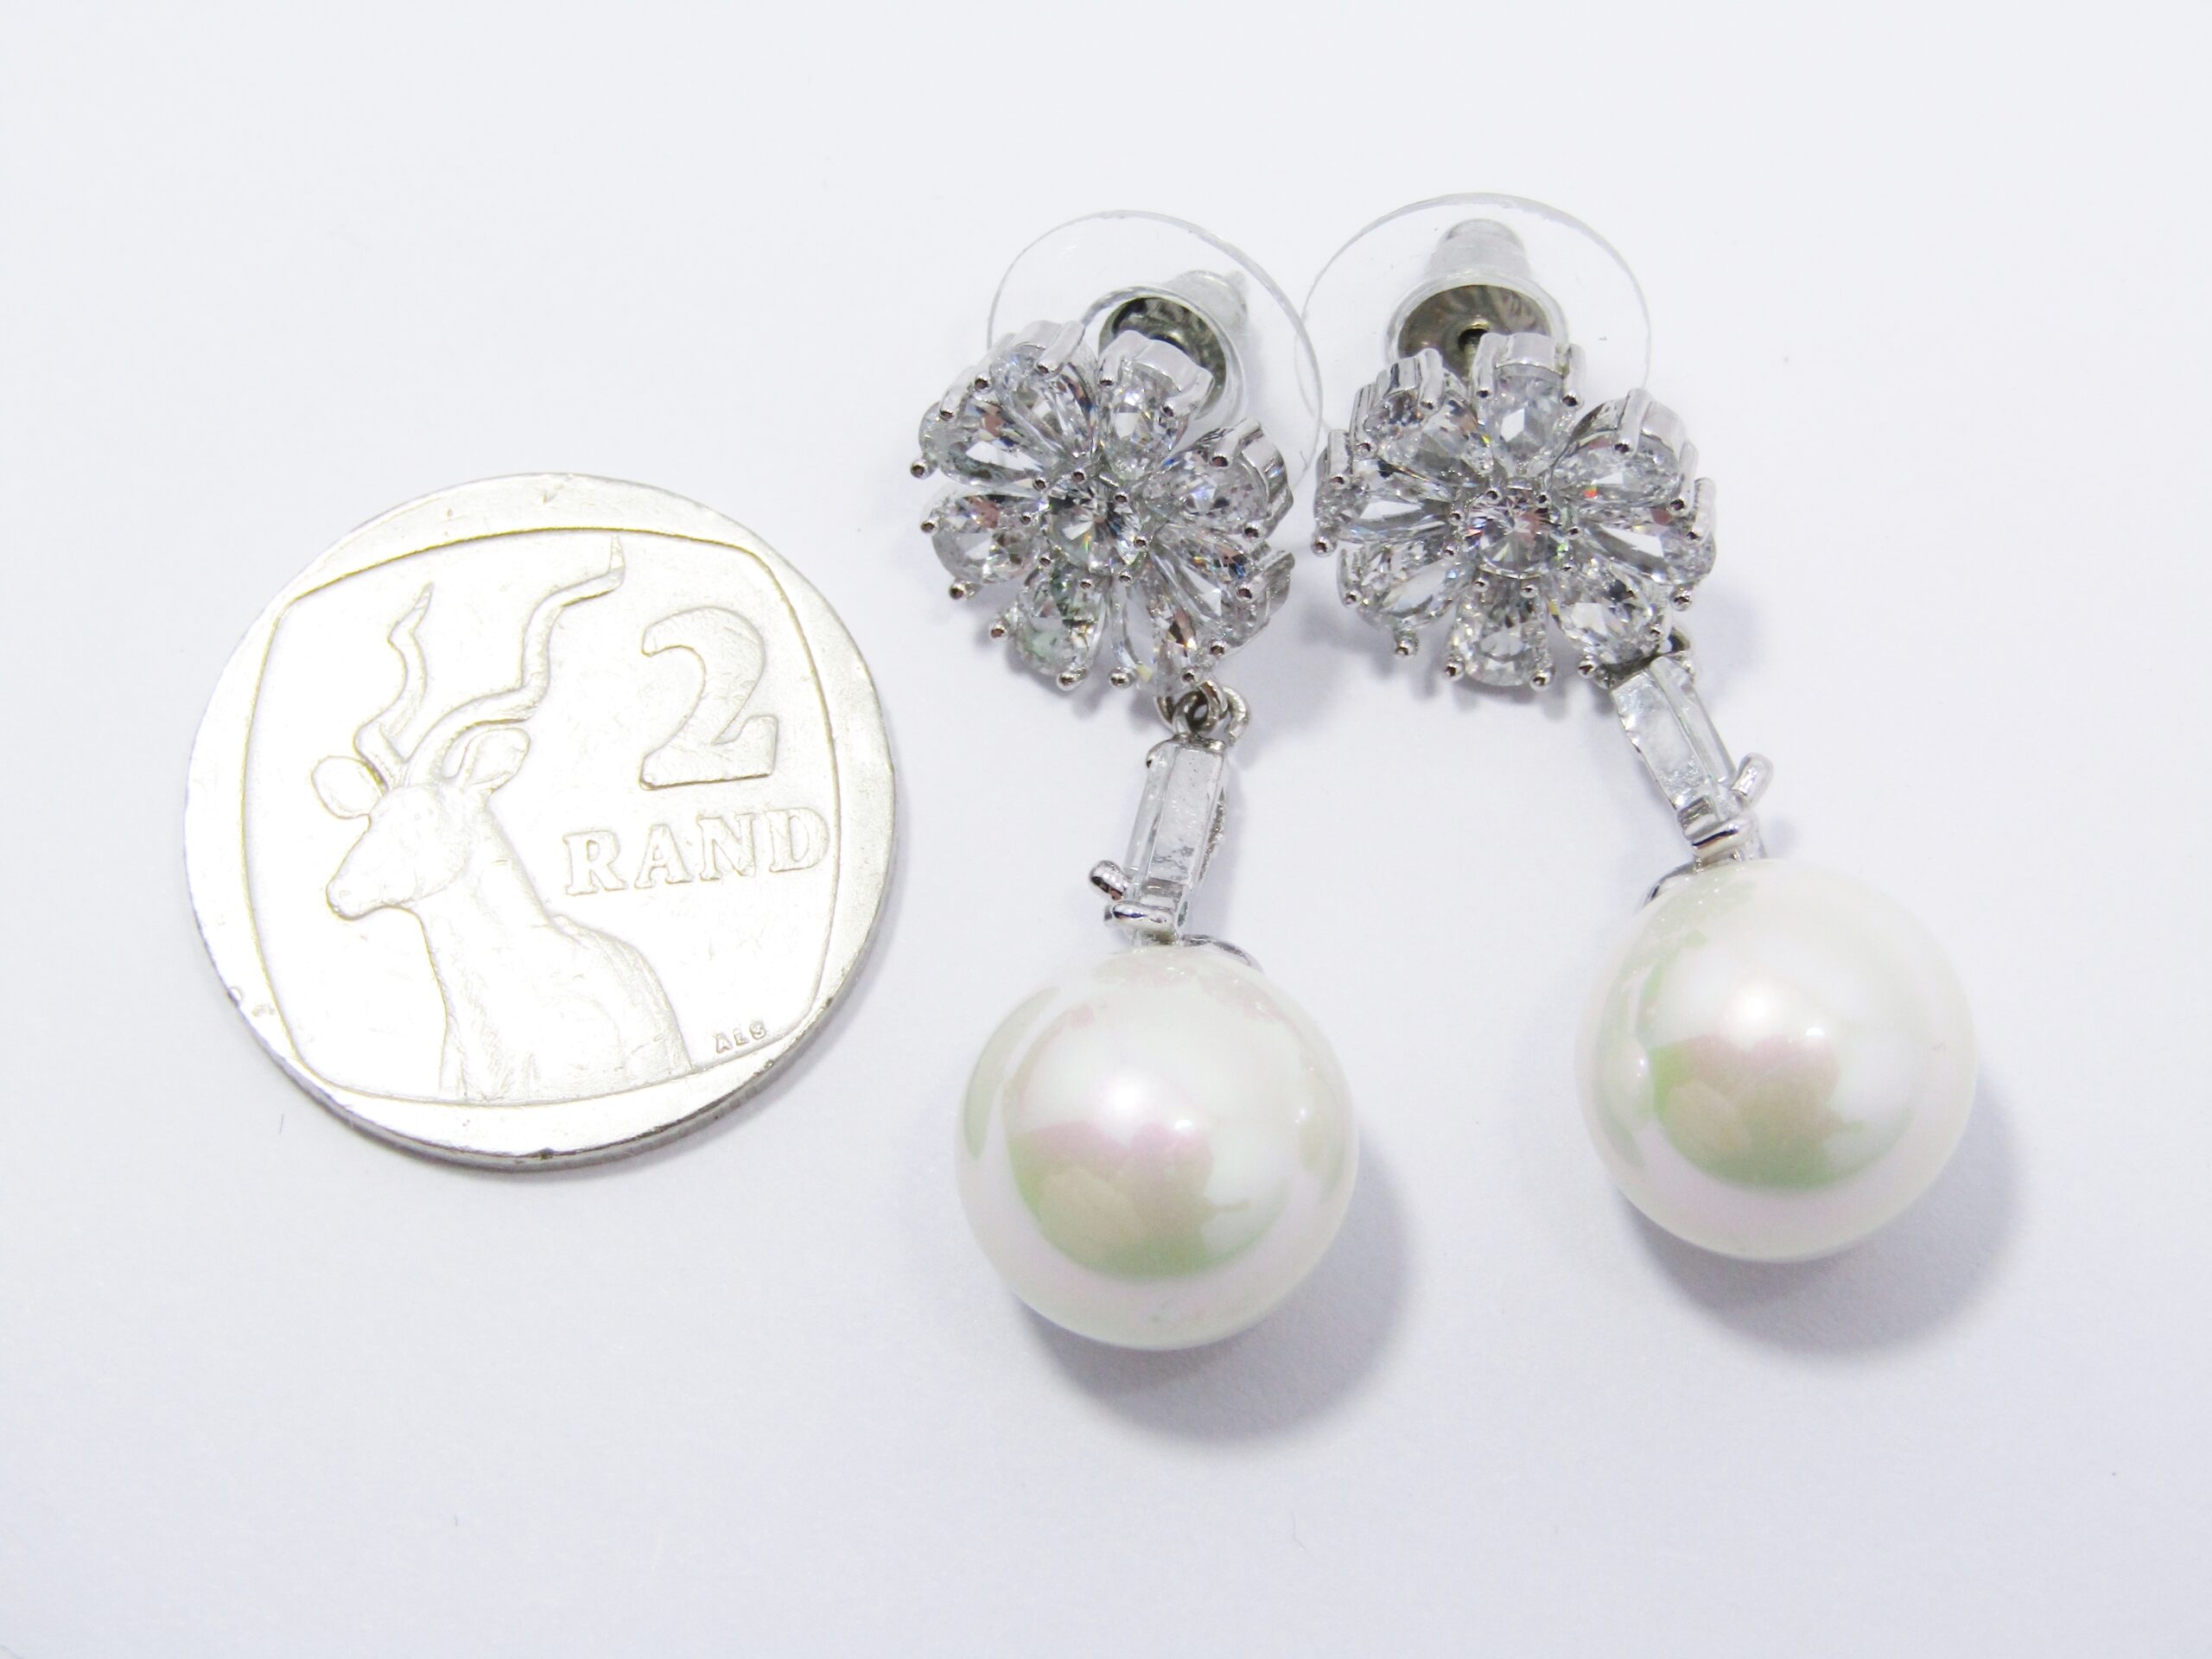 A Lovely Pair of Shell Pearl Dangling Earrings in a Silver Tone